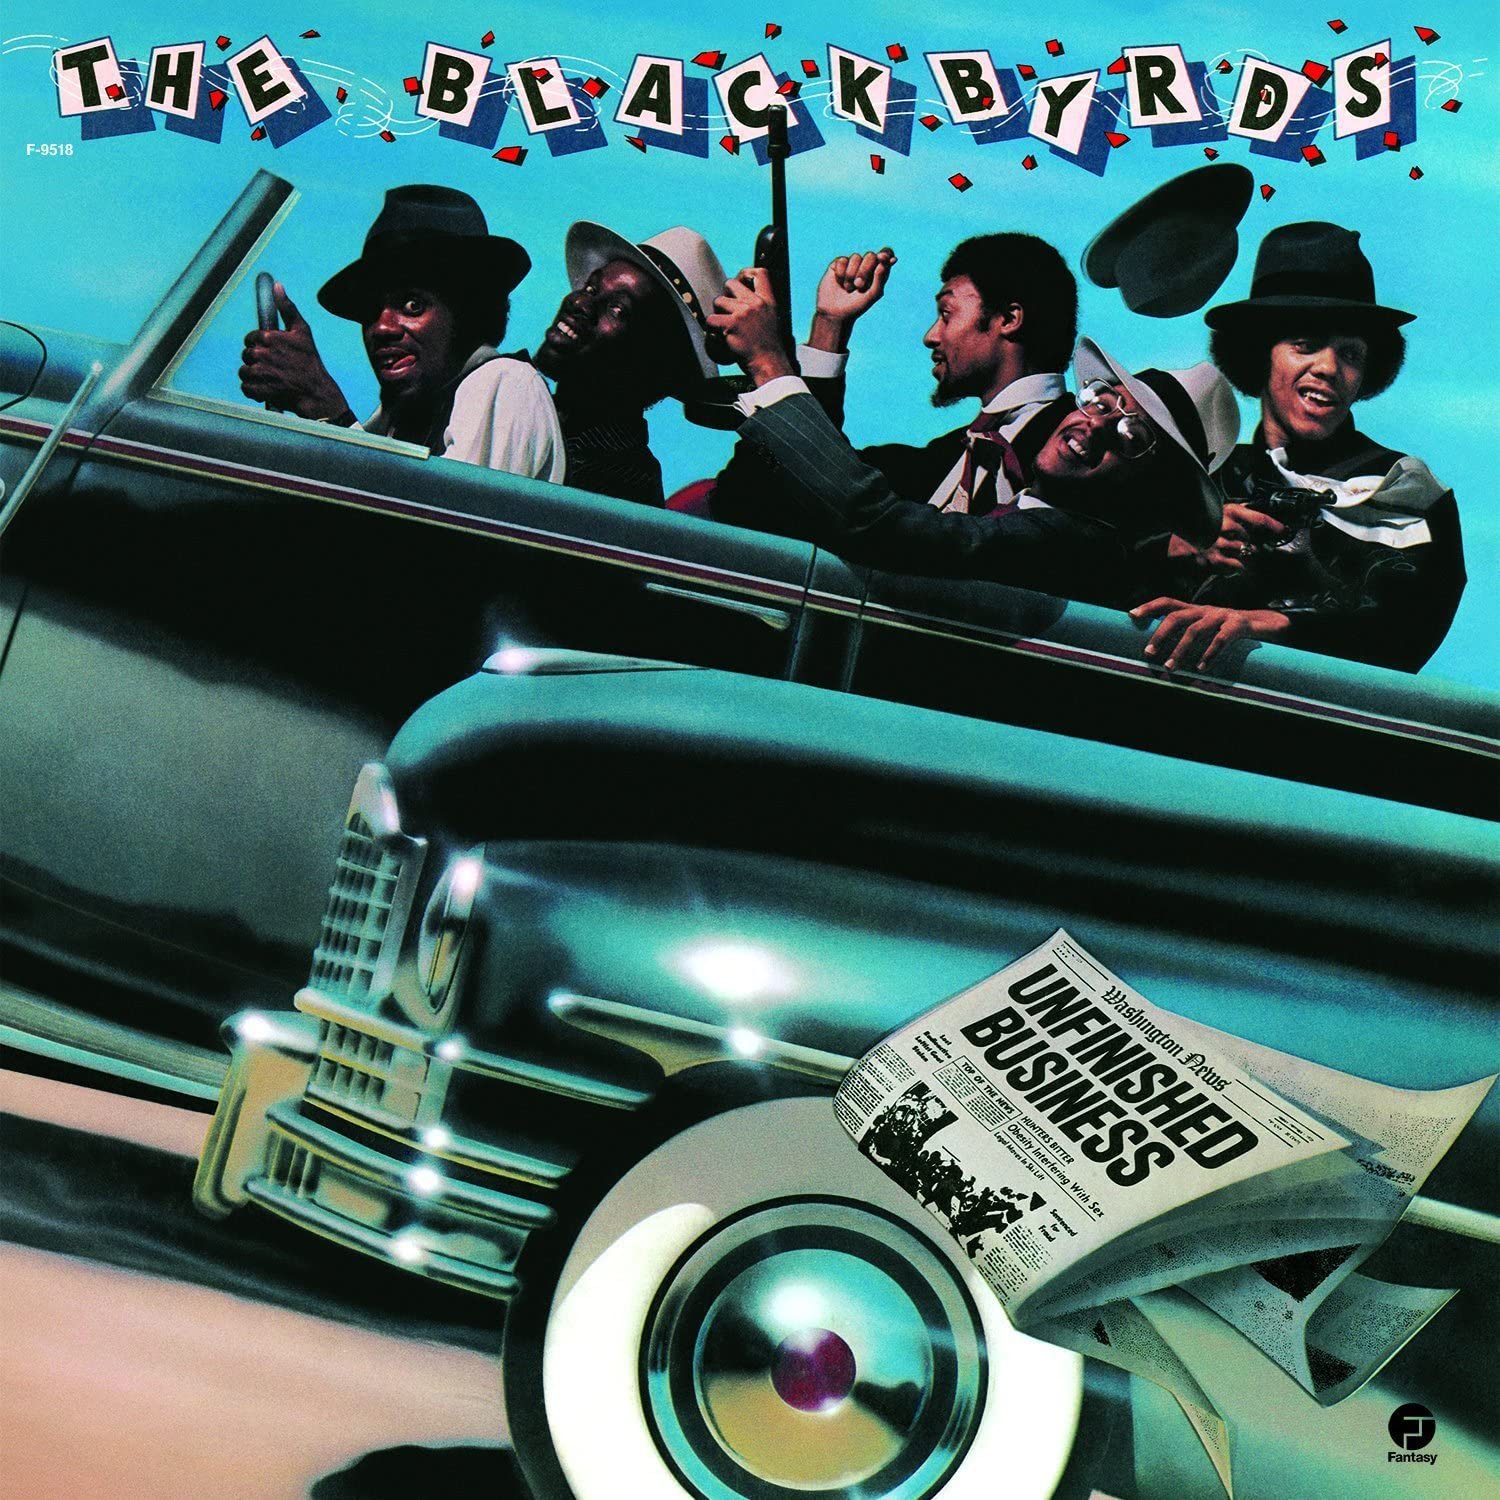 Unfinished Business by The Blackbyrds